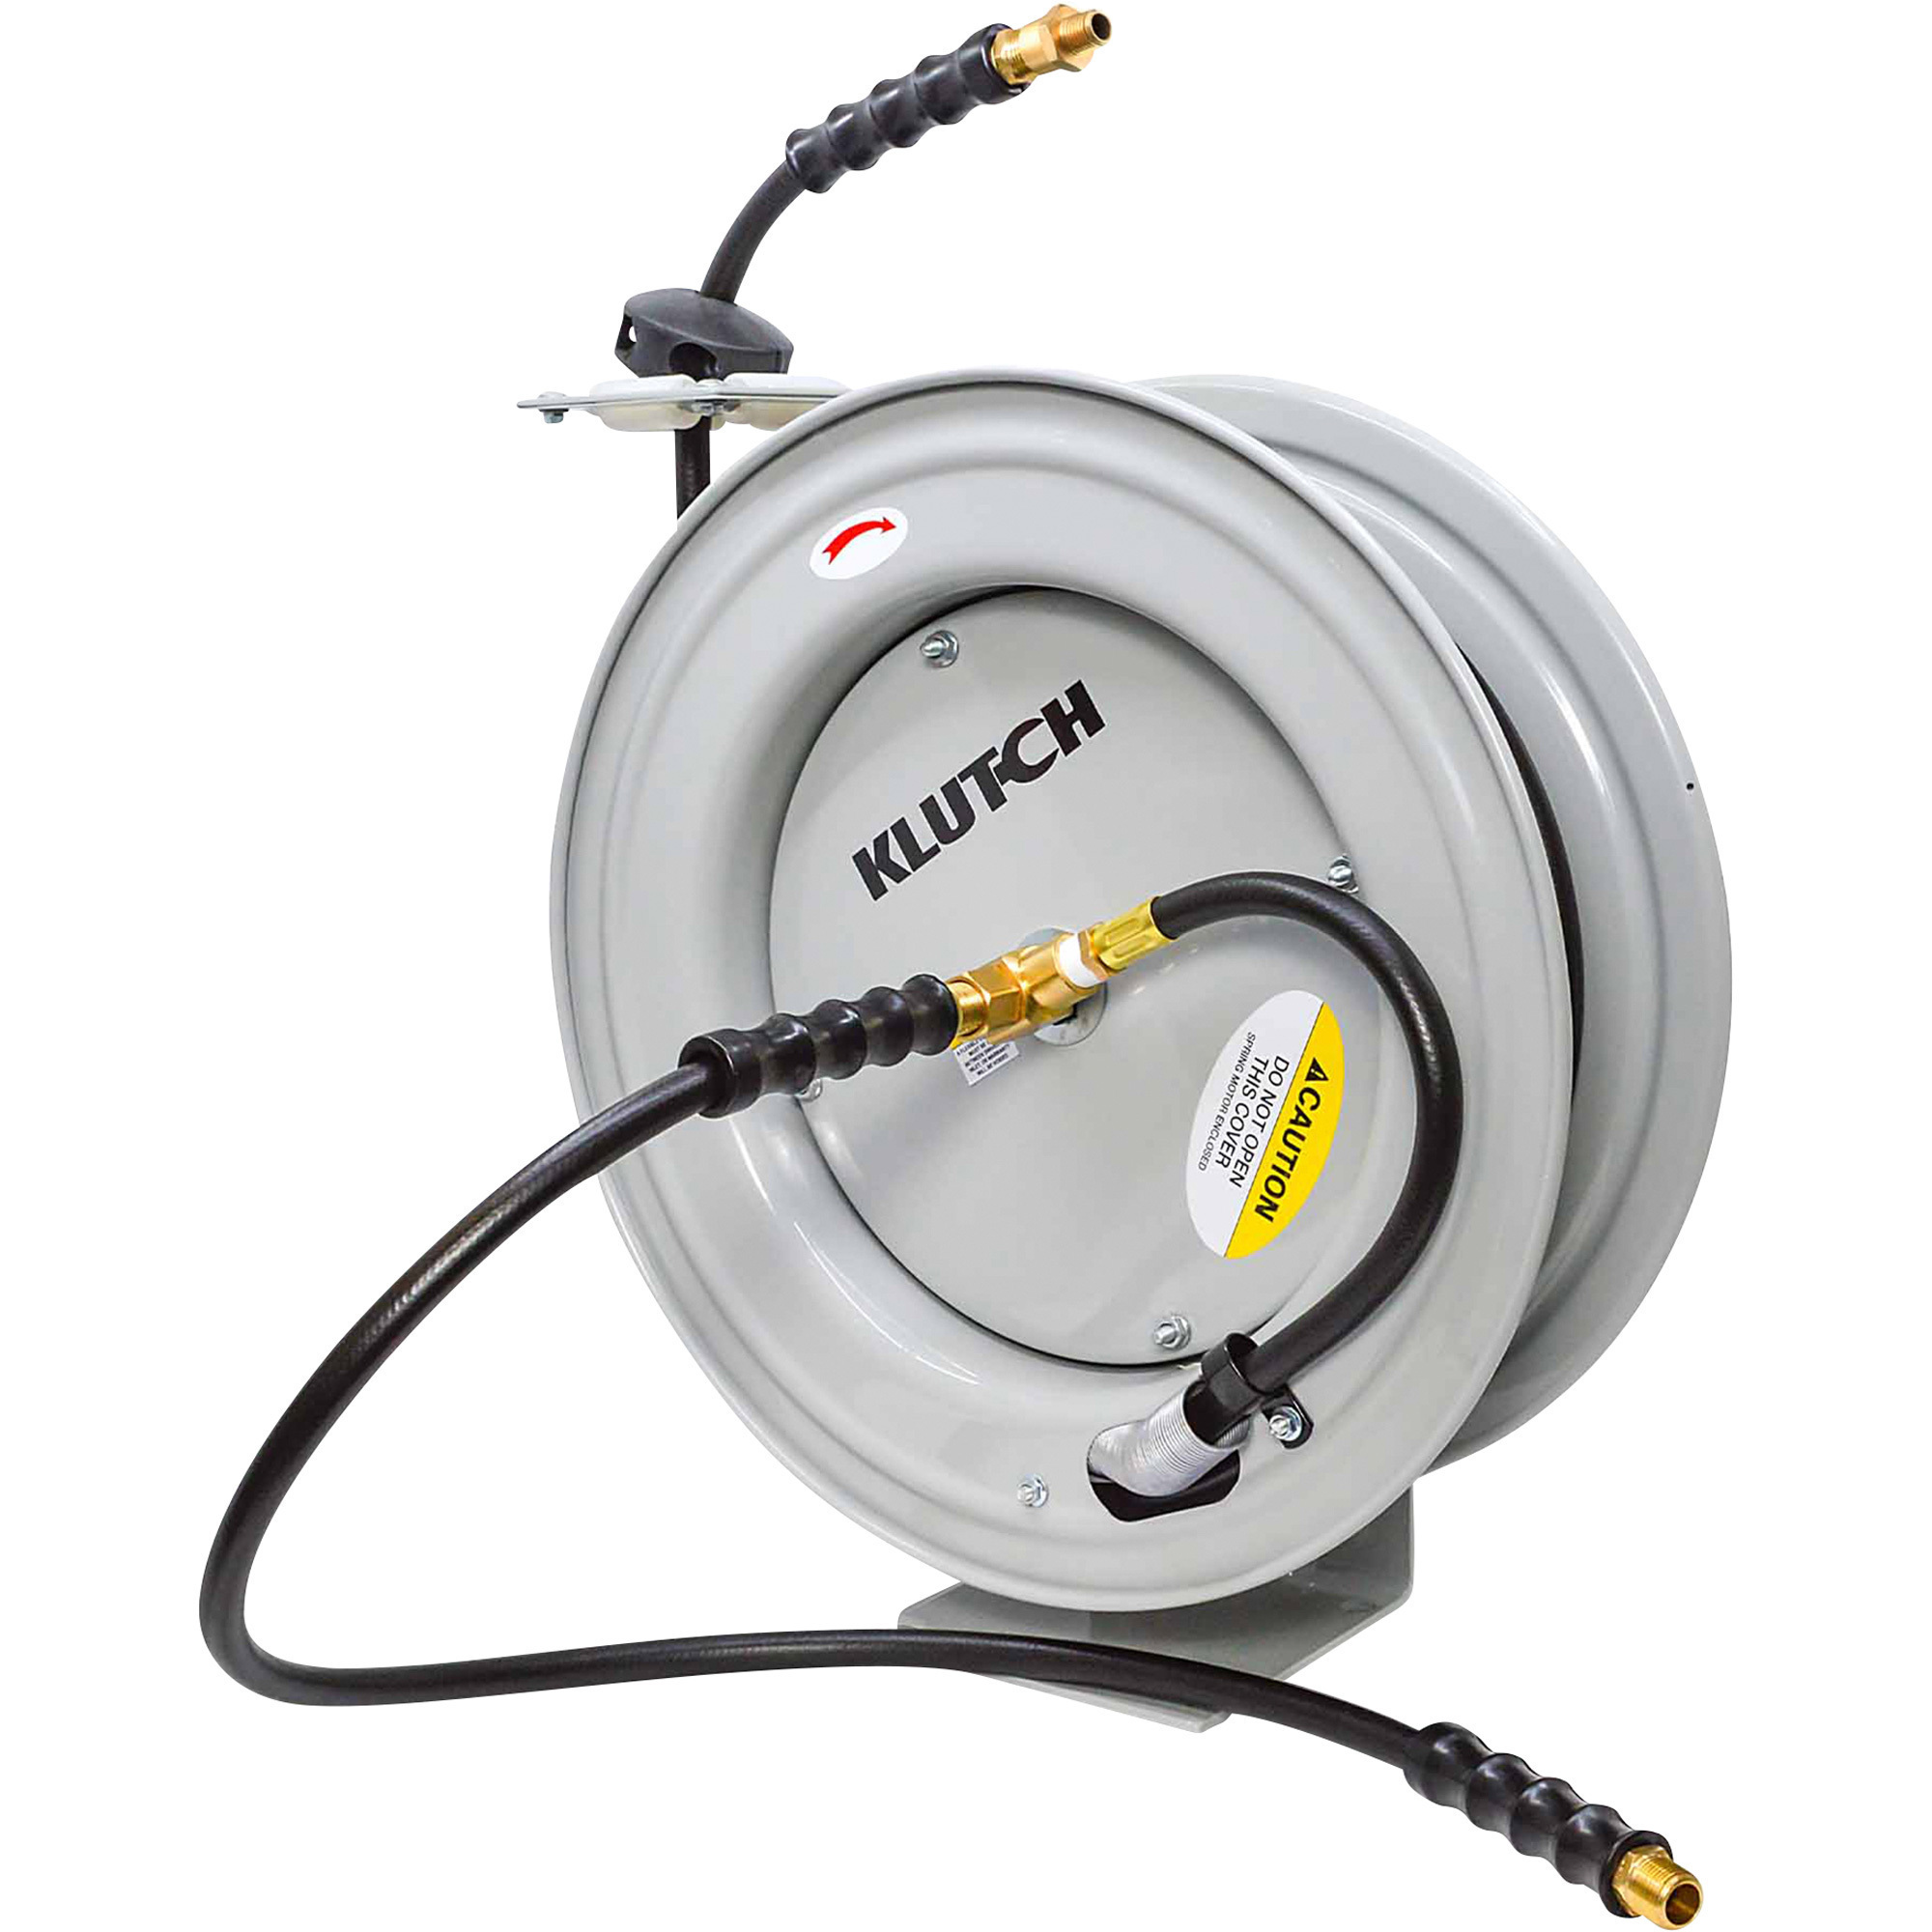 Klutch Auto-Rewind Air Hose Reel, with 3/8in. x 75ft. Rubber Hose, 300 PSI,  Model# TLEXR3875-NT